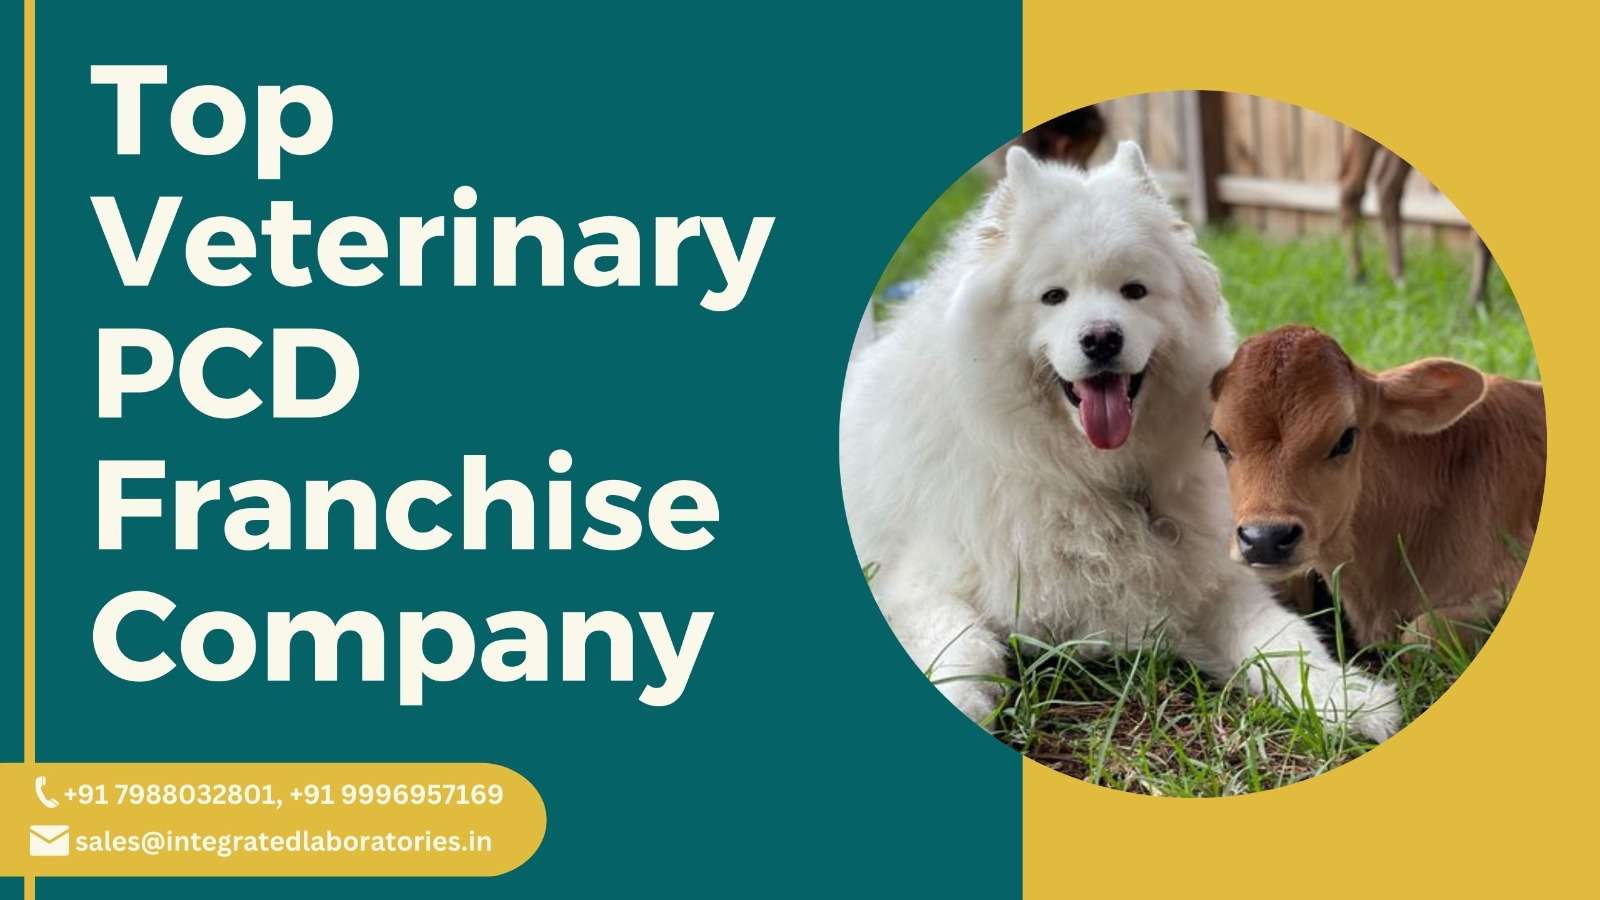 Top Veterinary PCD Franchise Company-Integrated Laboratories